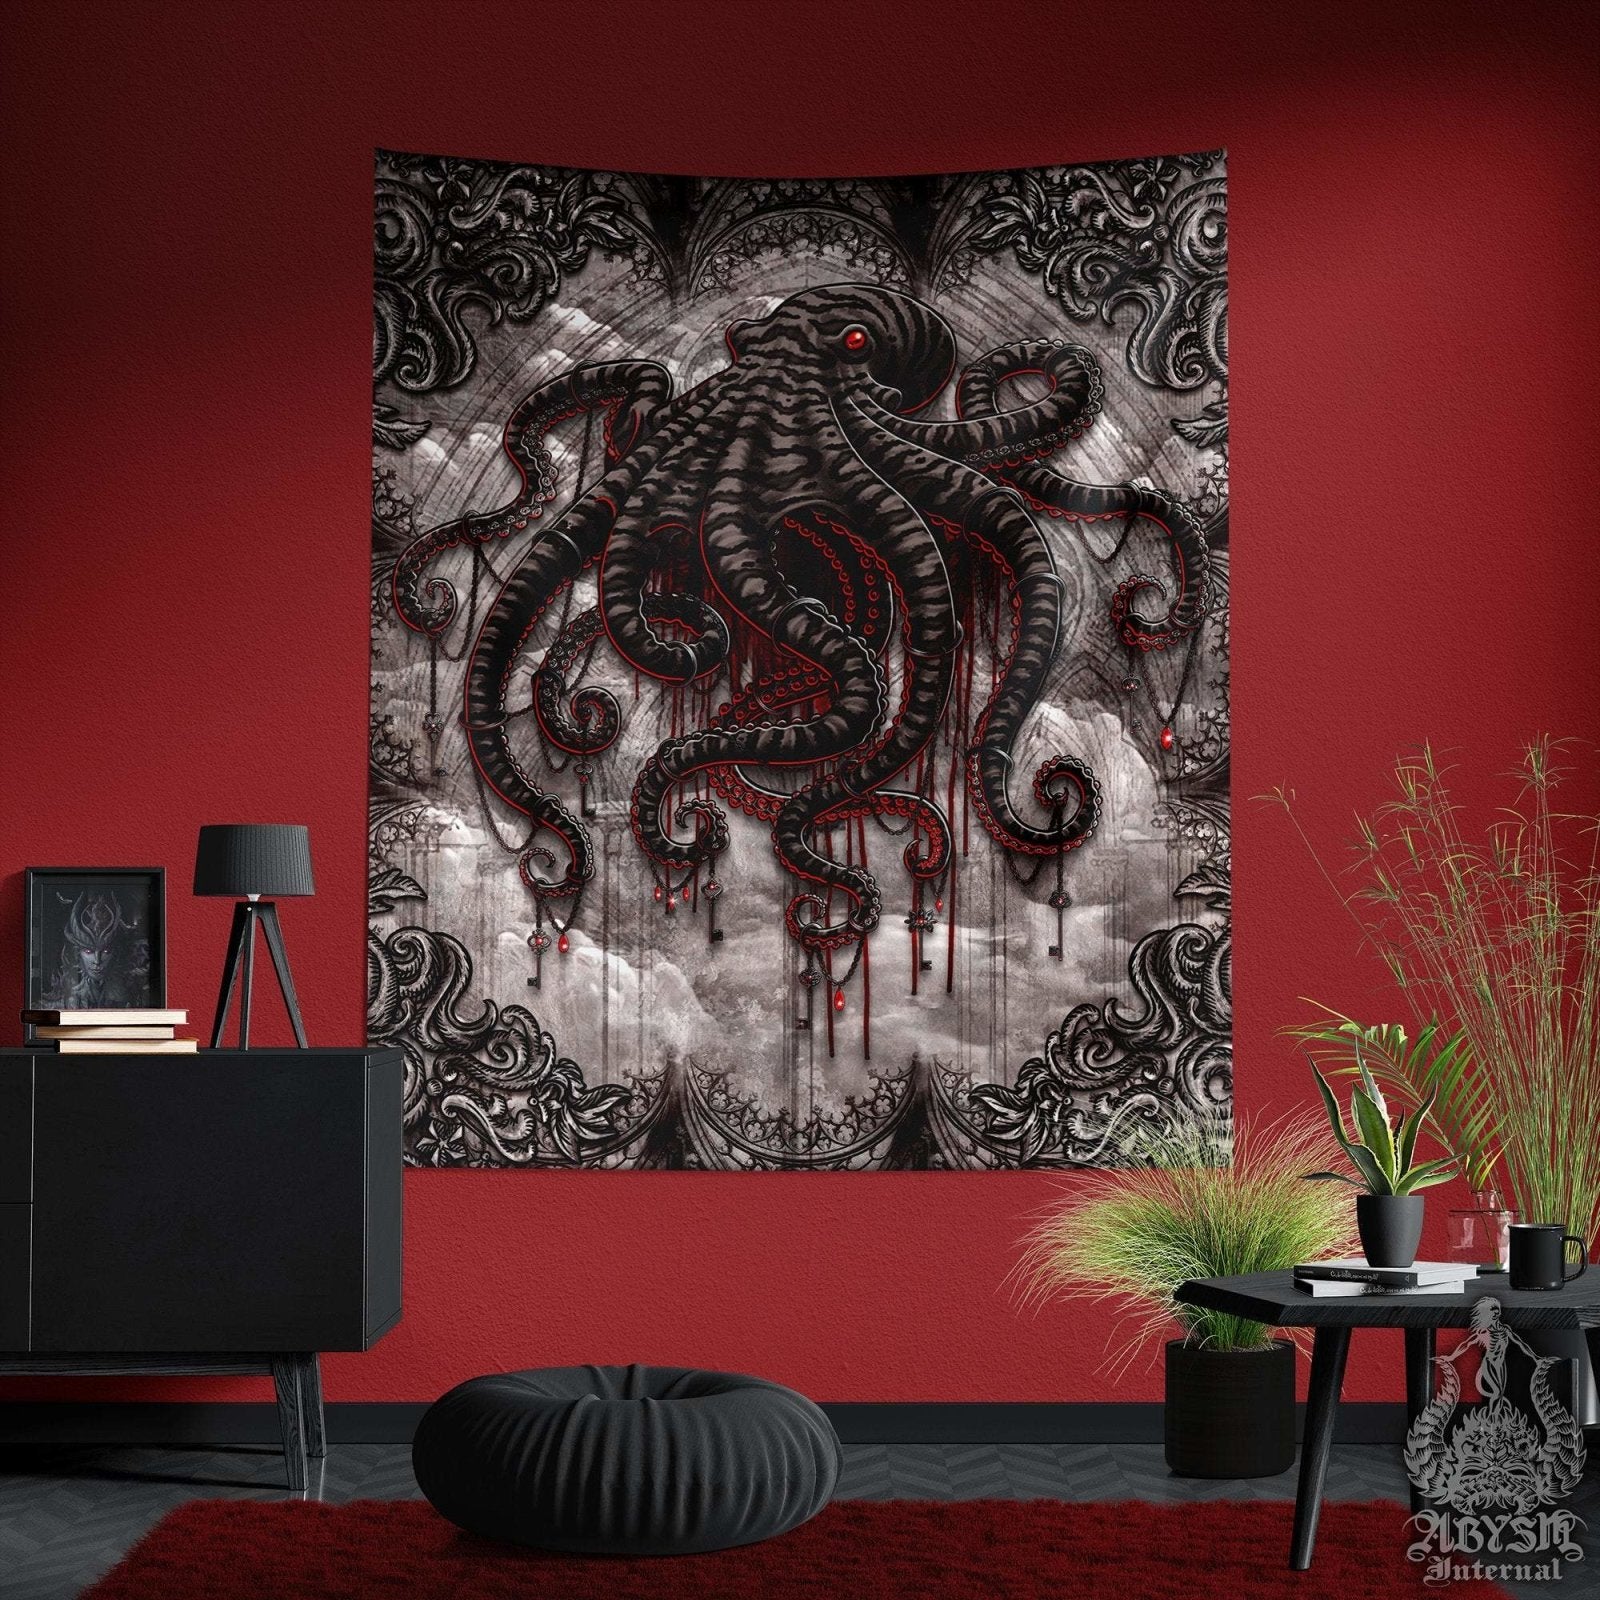 Gothic Tapestry, Octopus Wall Hanging, Goth Home Decor, Art Print - Horror Grunge, Grey - Abysm Internal